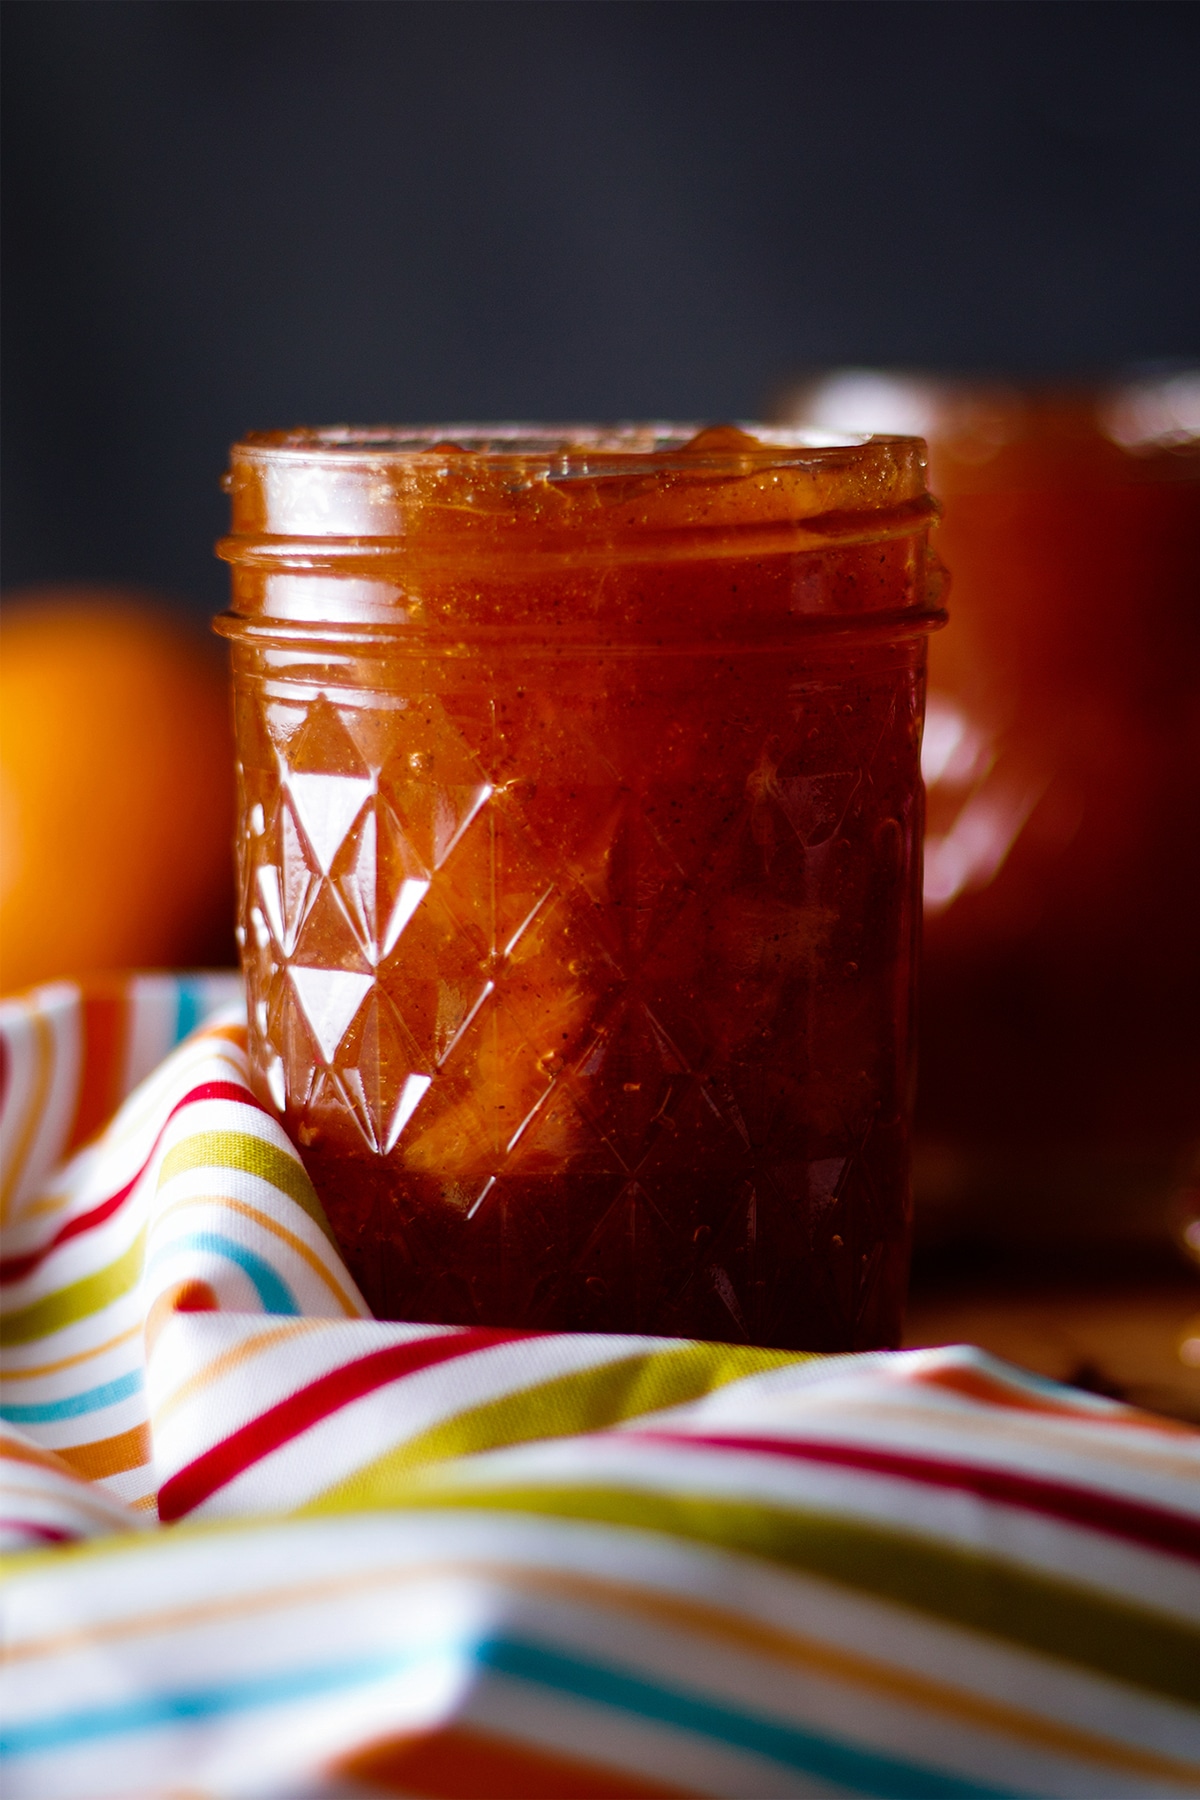 A jar of homemade peach preserves resting on a table covered with a colorful striped tablecloth.